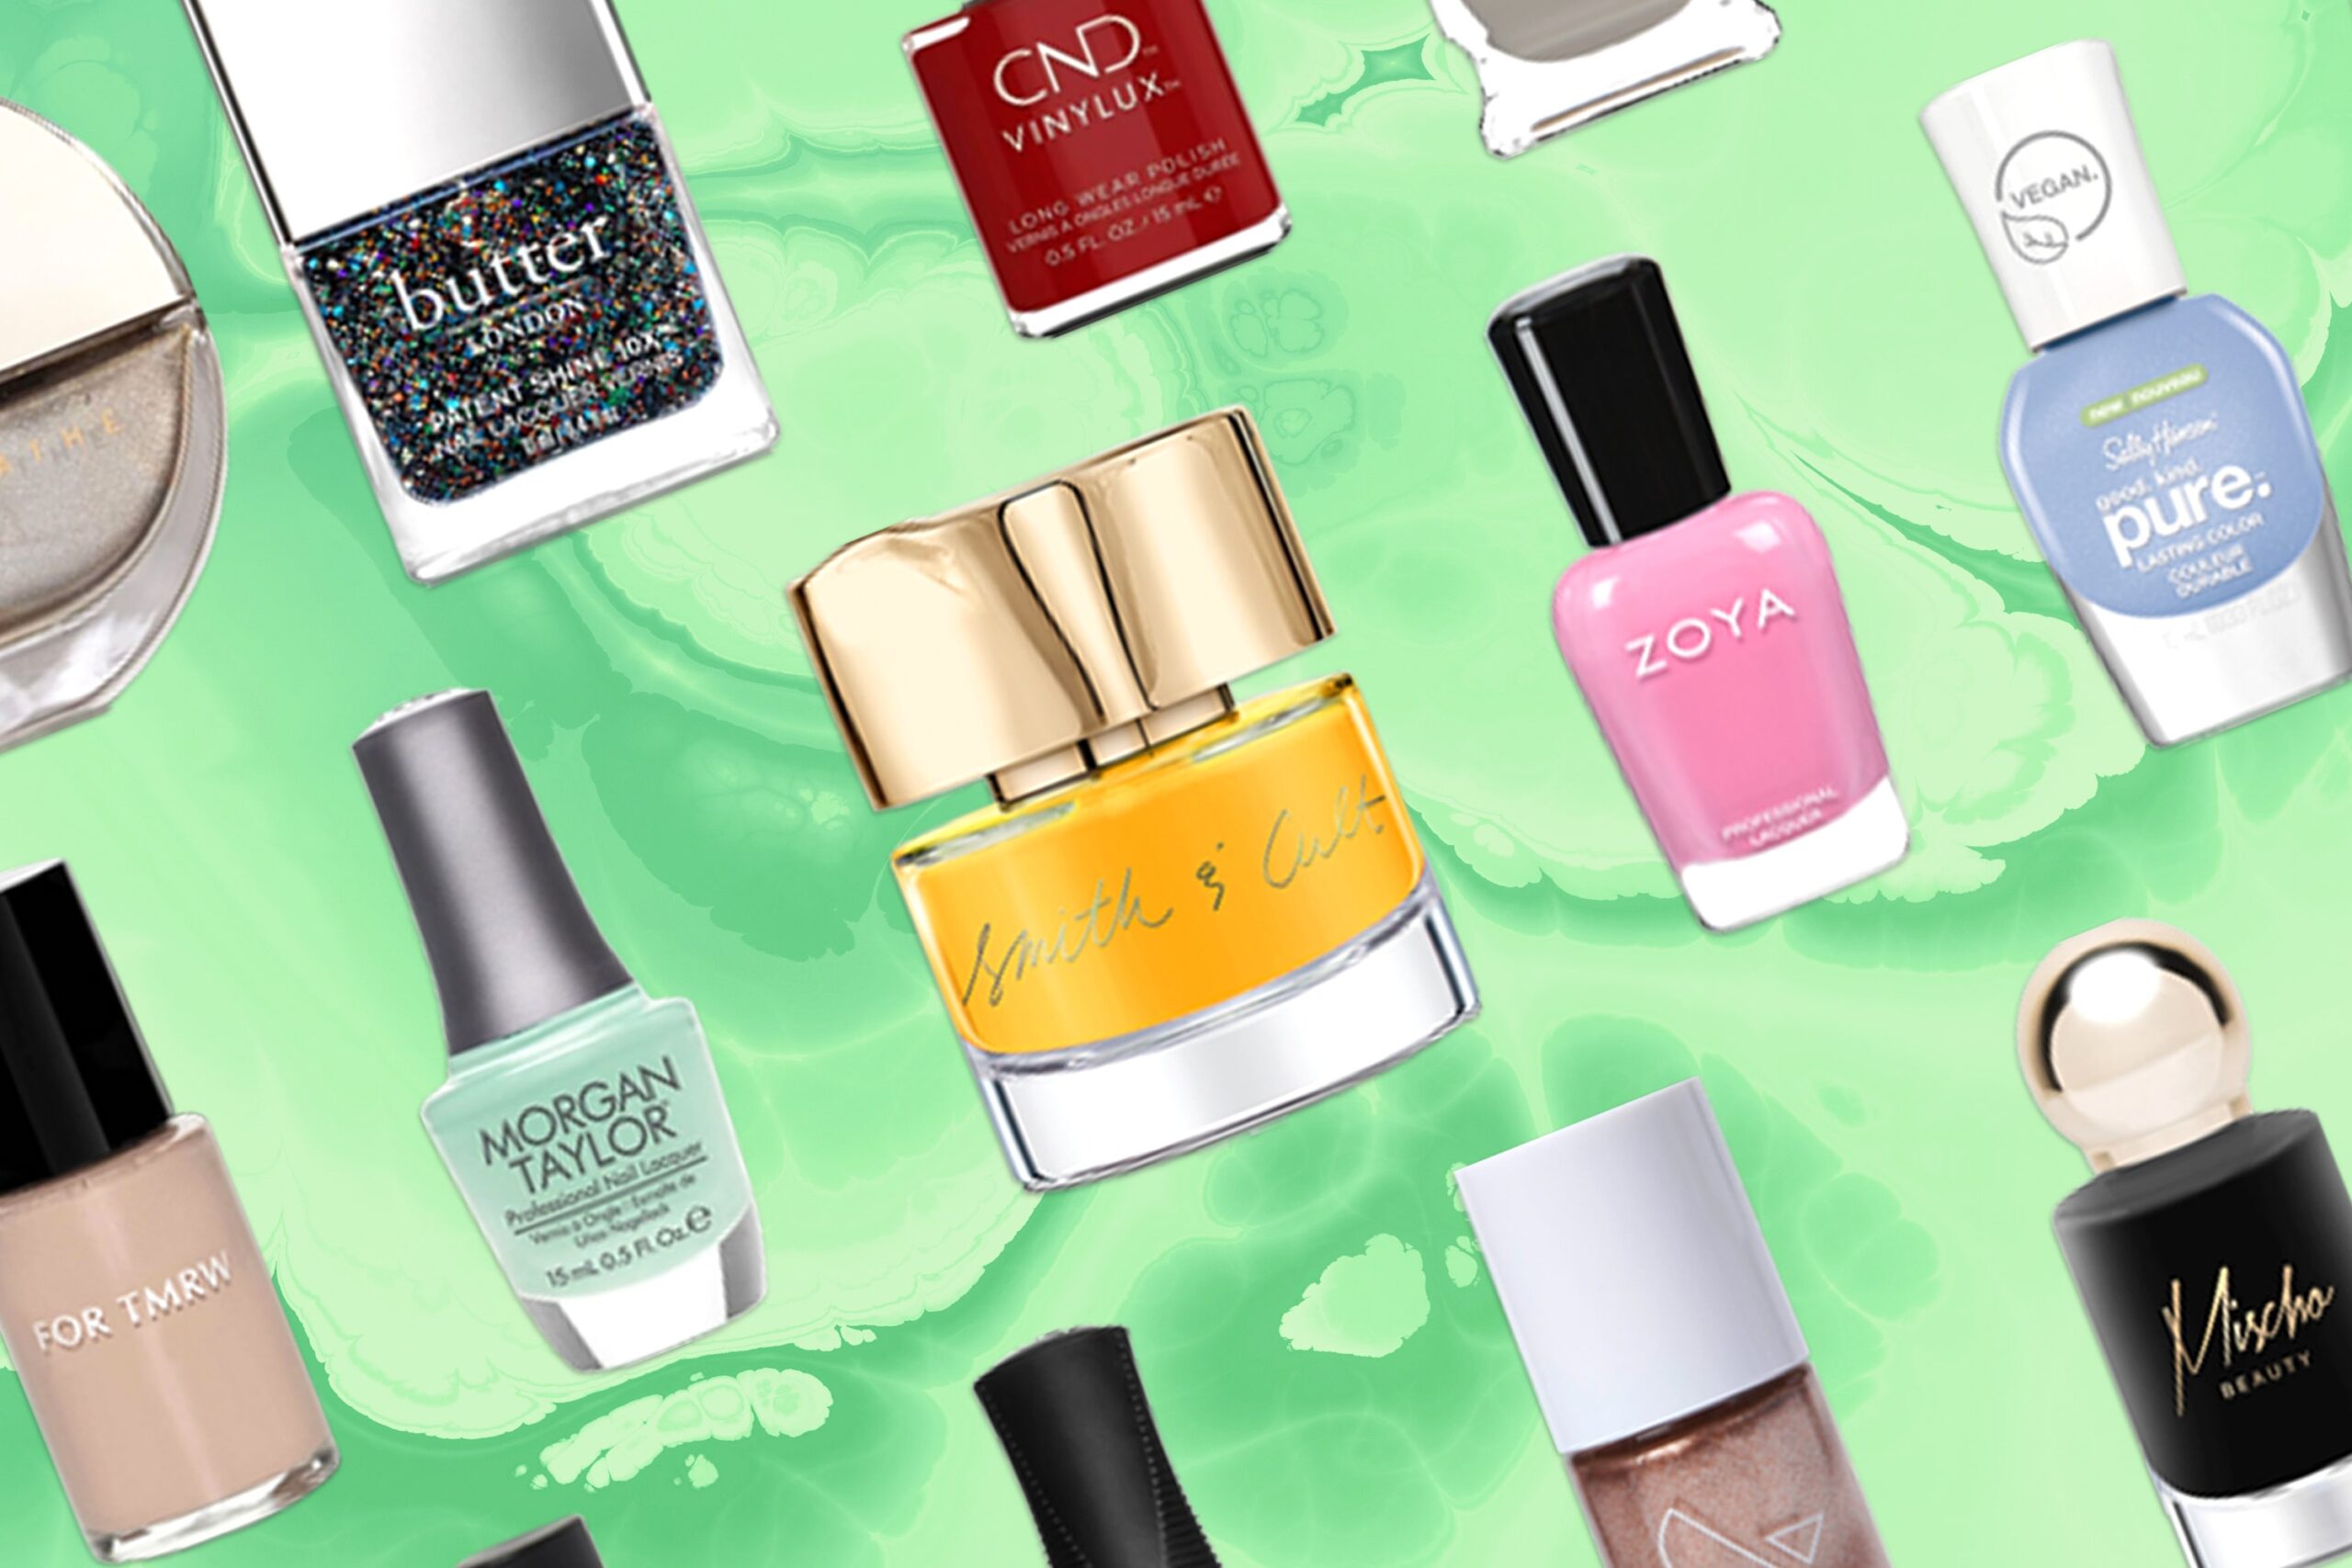 Luxe For Less: Budget Nail Brands That Feel Like A Million Bucks